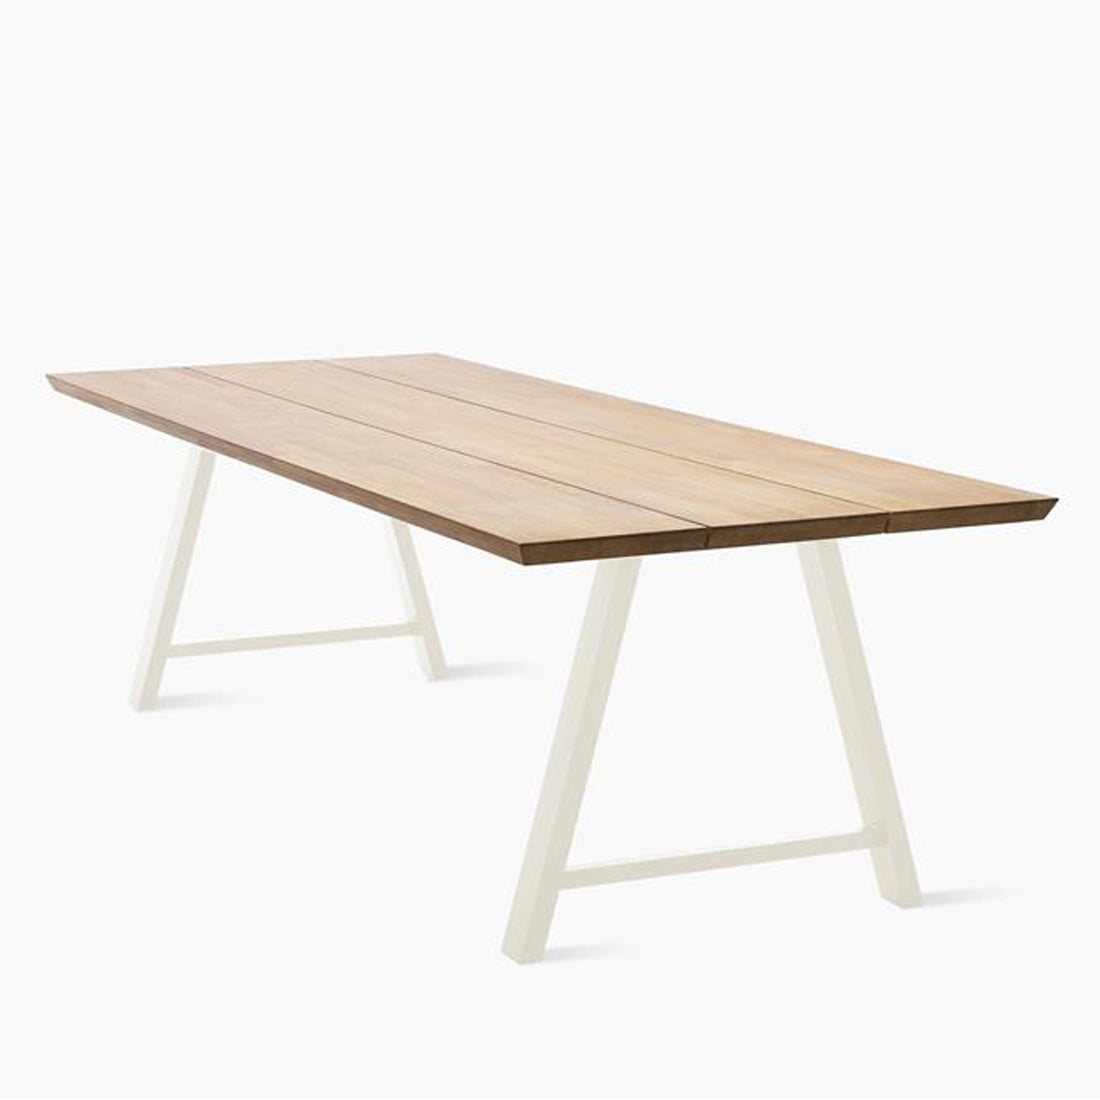 Vincent Sheppard Matteo dining table outdoor